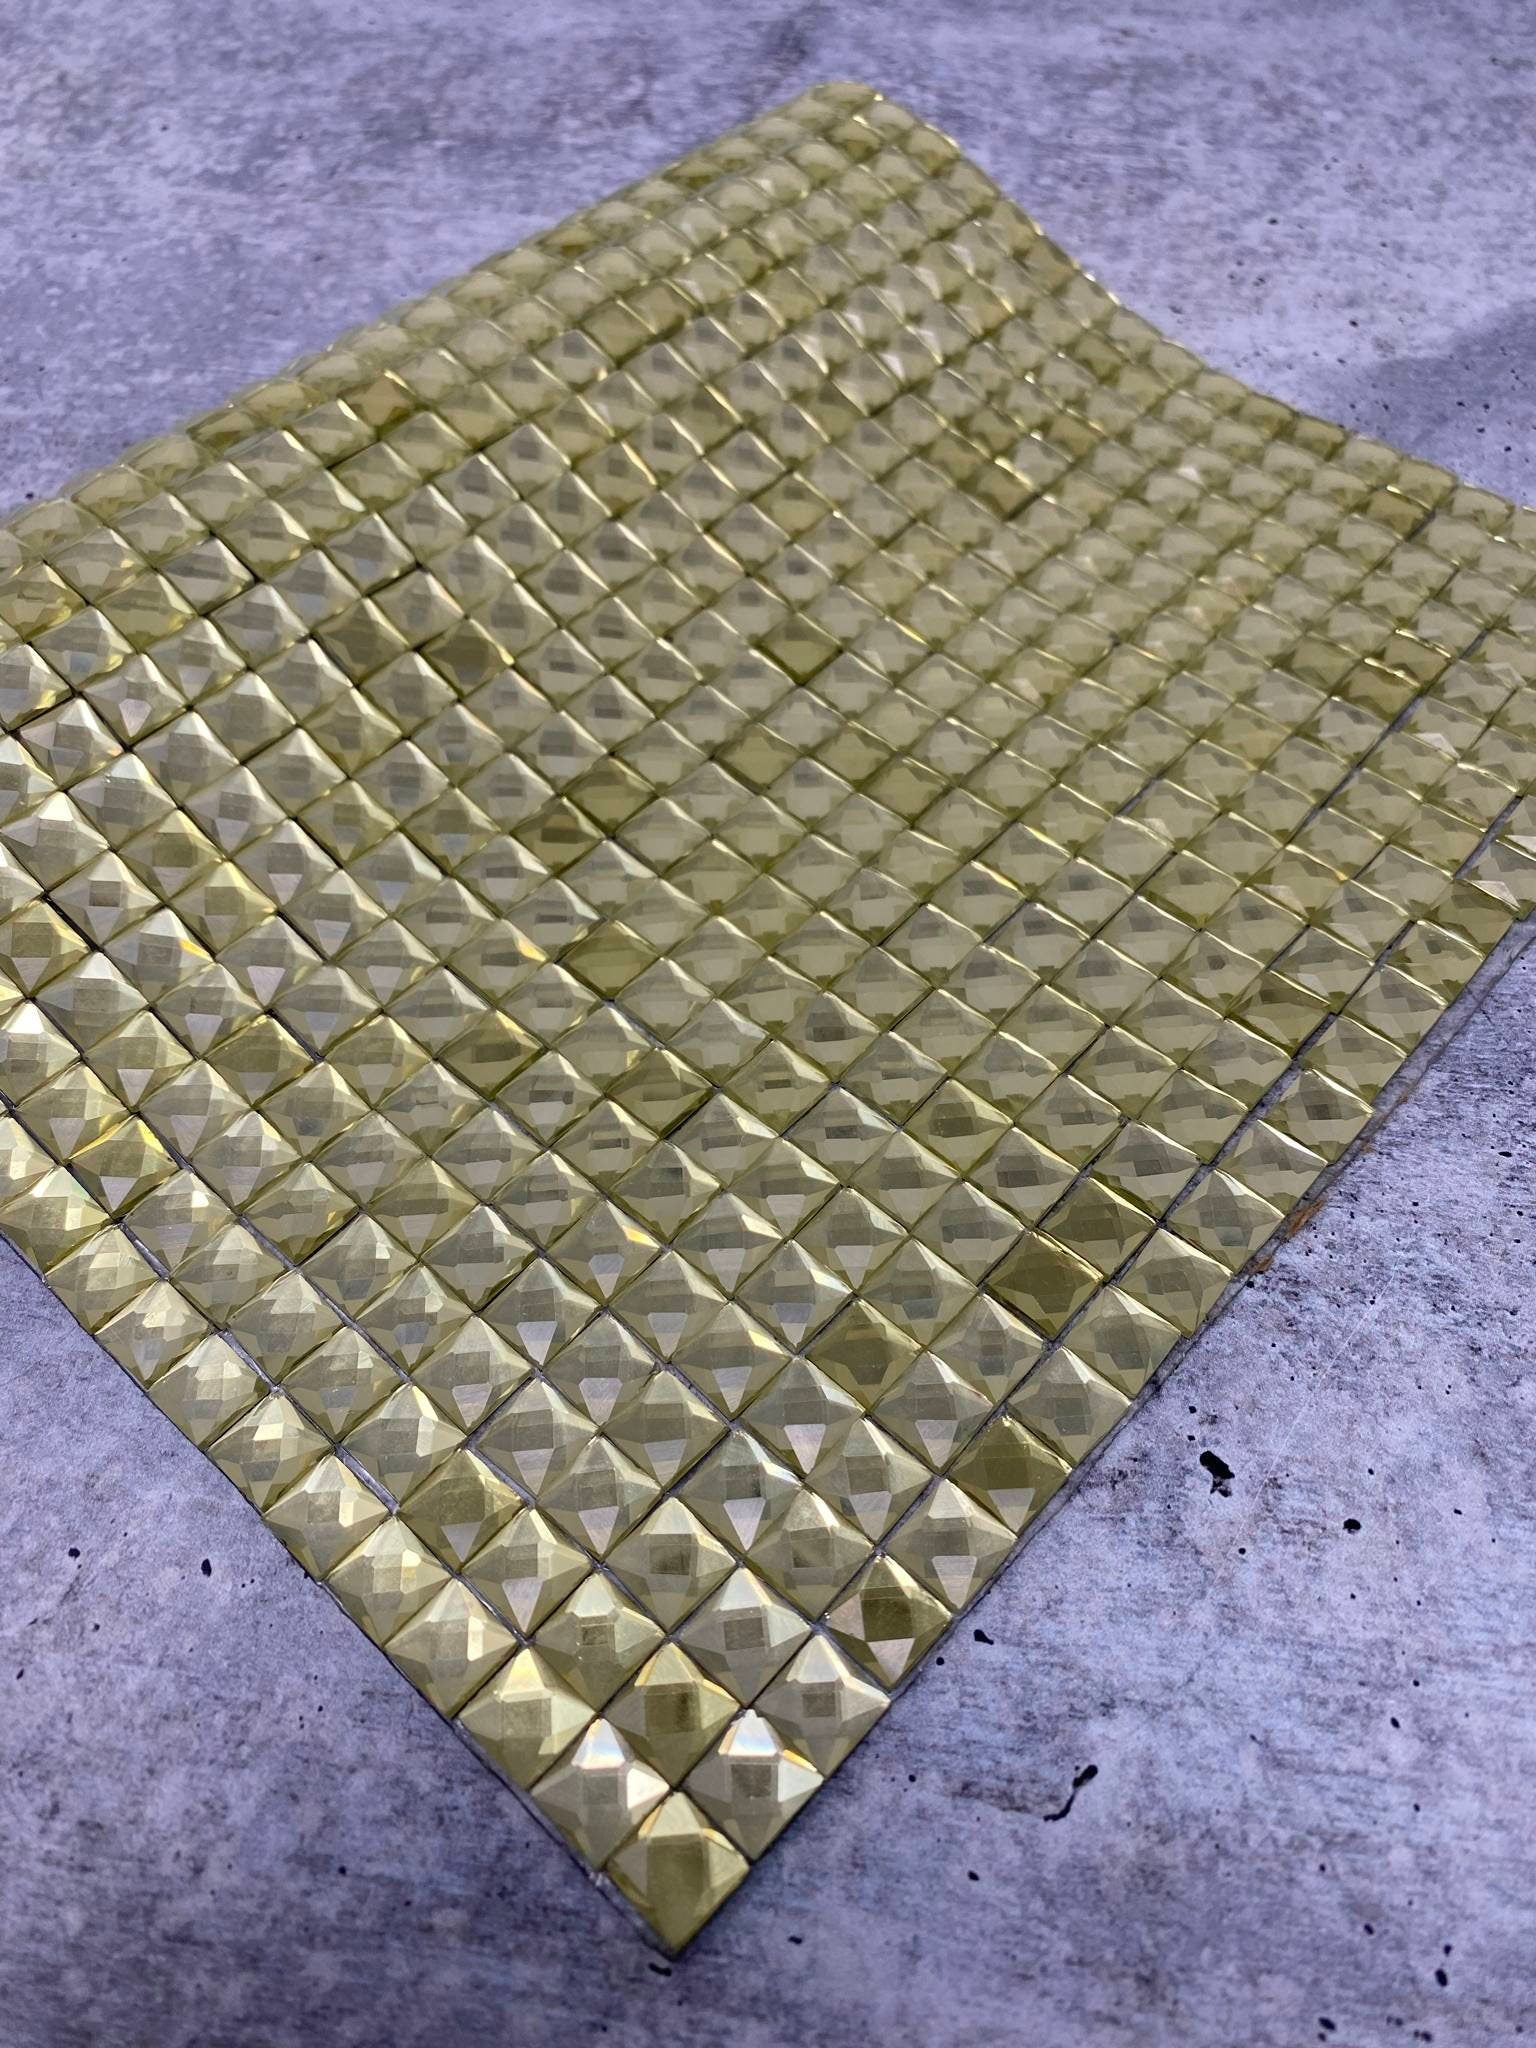 Glass "YELLOW" Squares,Hot-fix Rhinestone Sheet for Blinging Clothes, Shoes, Handbags, Wine Glasses & More, 10" x 16.5" sz, 135 Squares